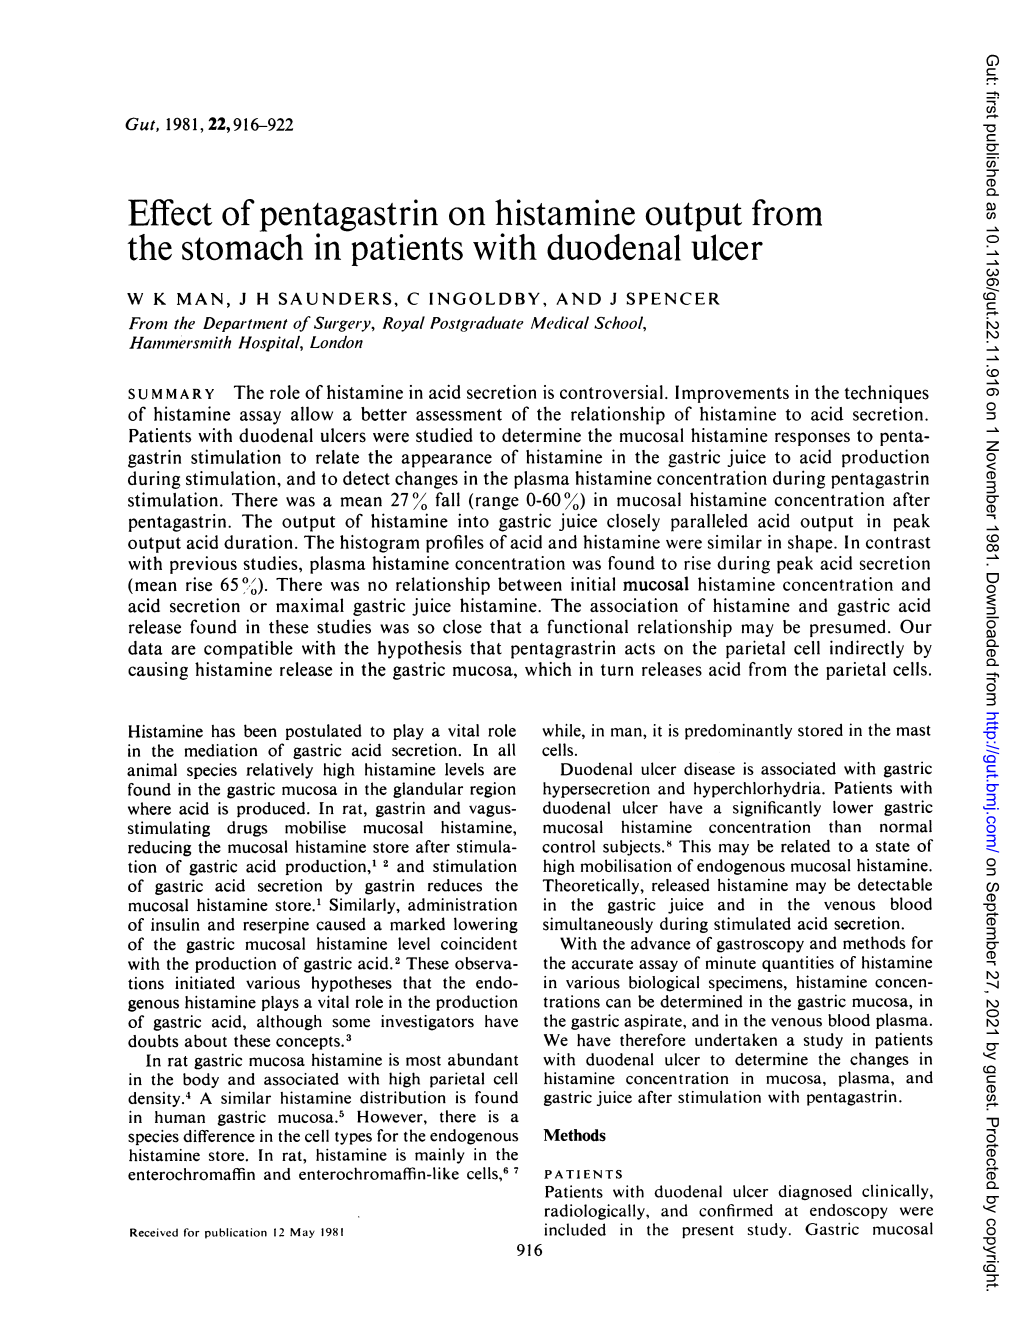 Effect of Pentagastrin on Histamine Output from the Stomach in Patients